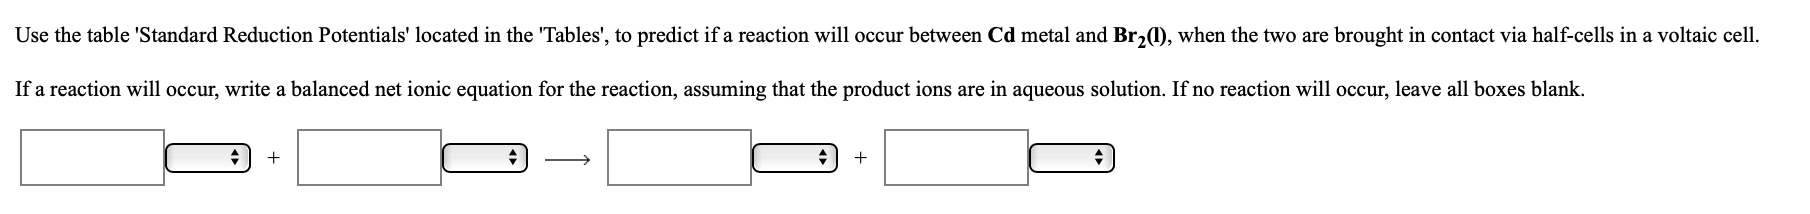 Use the table 'Standard Reduction Potentials' located in the 'Tables', to predict if a reaction will occur between Cd metal and Br,1), when the two are brought in contact via half-cells in a voltaic cell.
If a reaction will occur, write a balanced net ionic equation for the reaction, assuming that the product ions are in aqueous solution. If no reaction will occur, leave all boxes blank.
